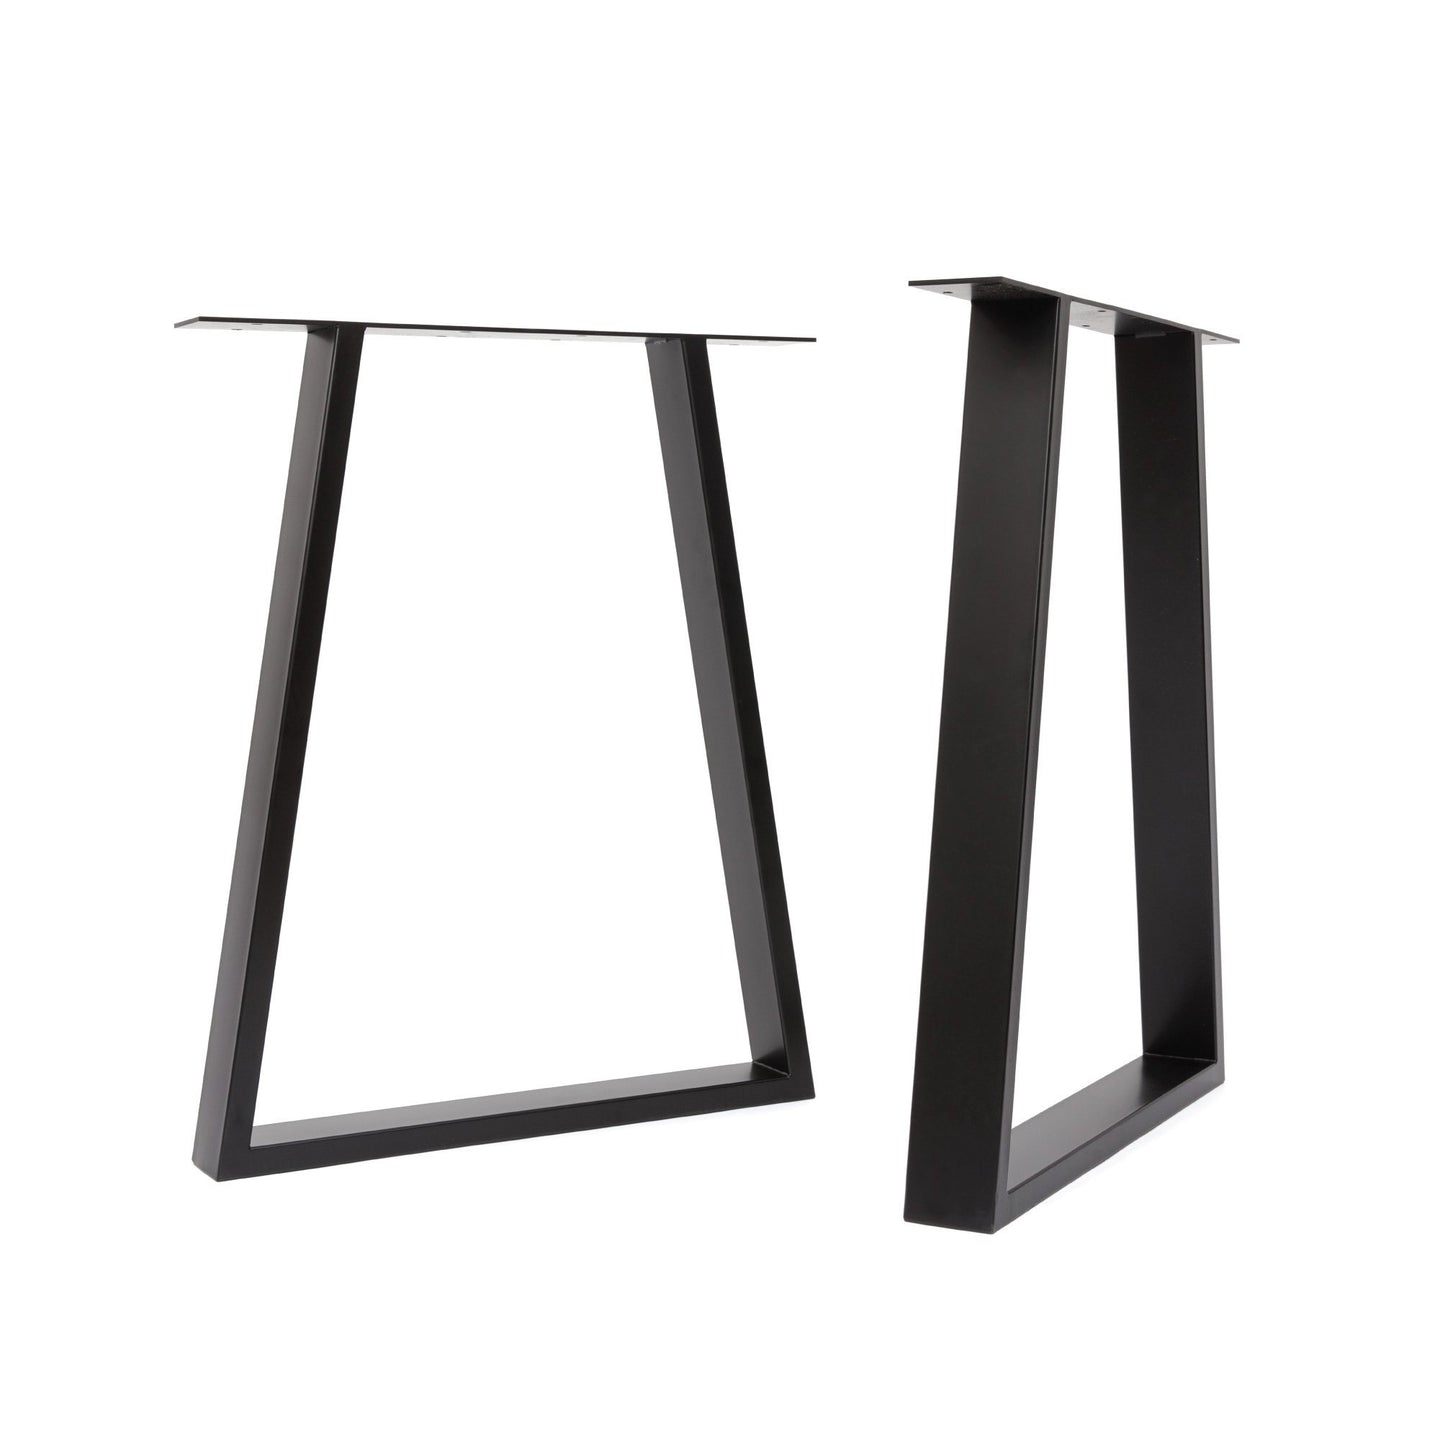 Trapezium industrial table + bench legs